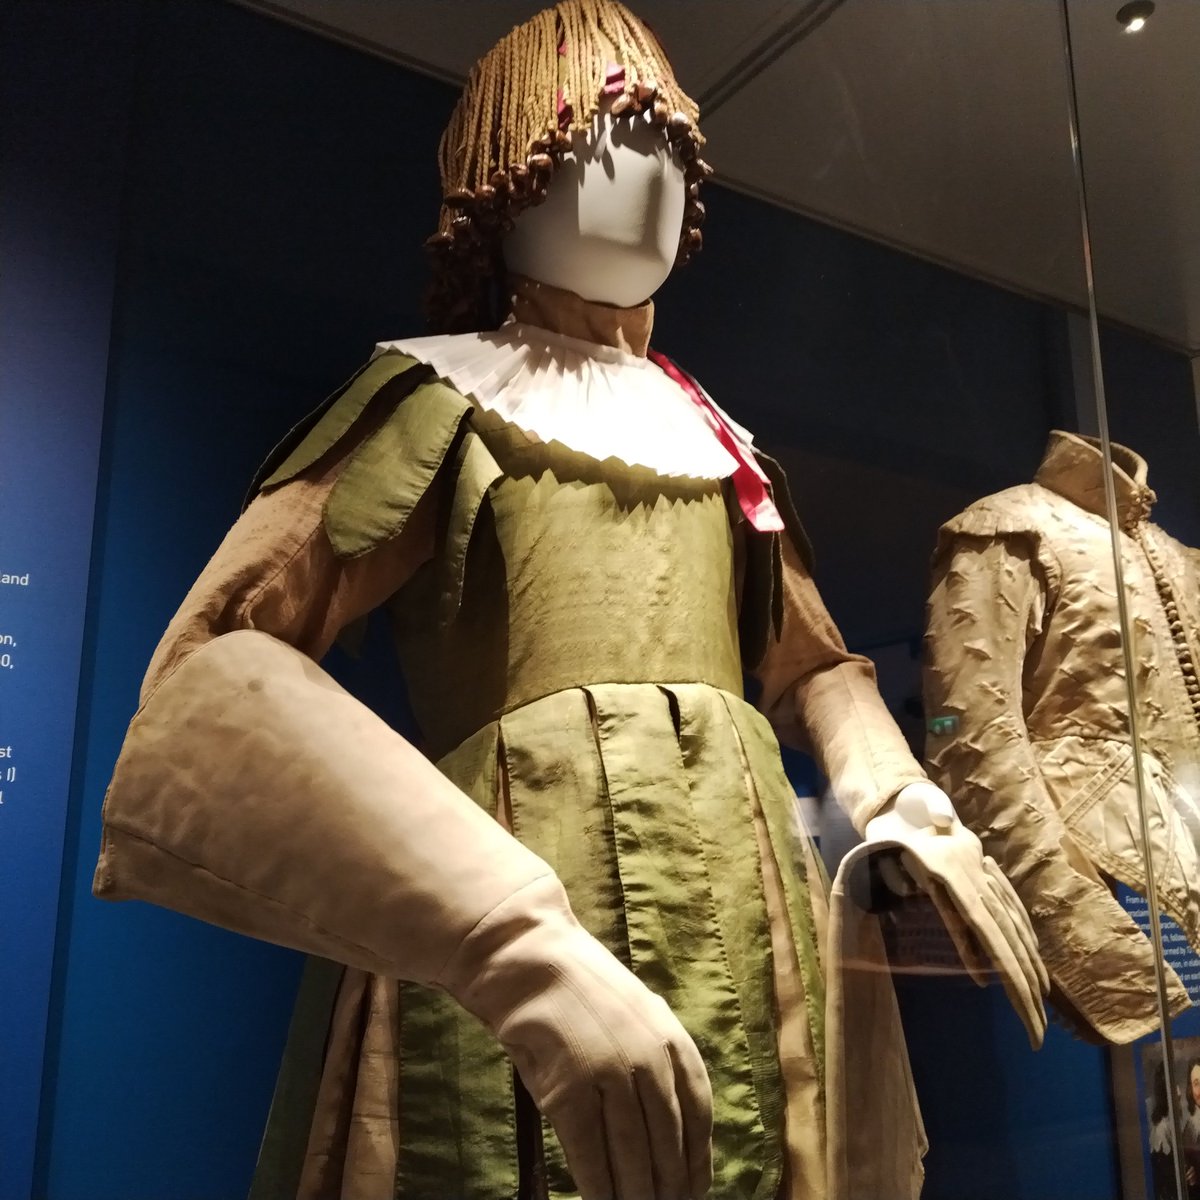 This is the only surviving example of a Glover's Dance Dress, typical of the elaborate sorts of civic performance costume dating back to the medieval period across Europe's towns & cities. This example was worn in 1633 for the river dance performed for Charles I's visit to Perth.